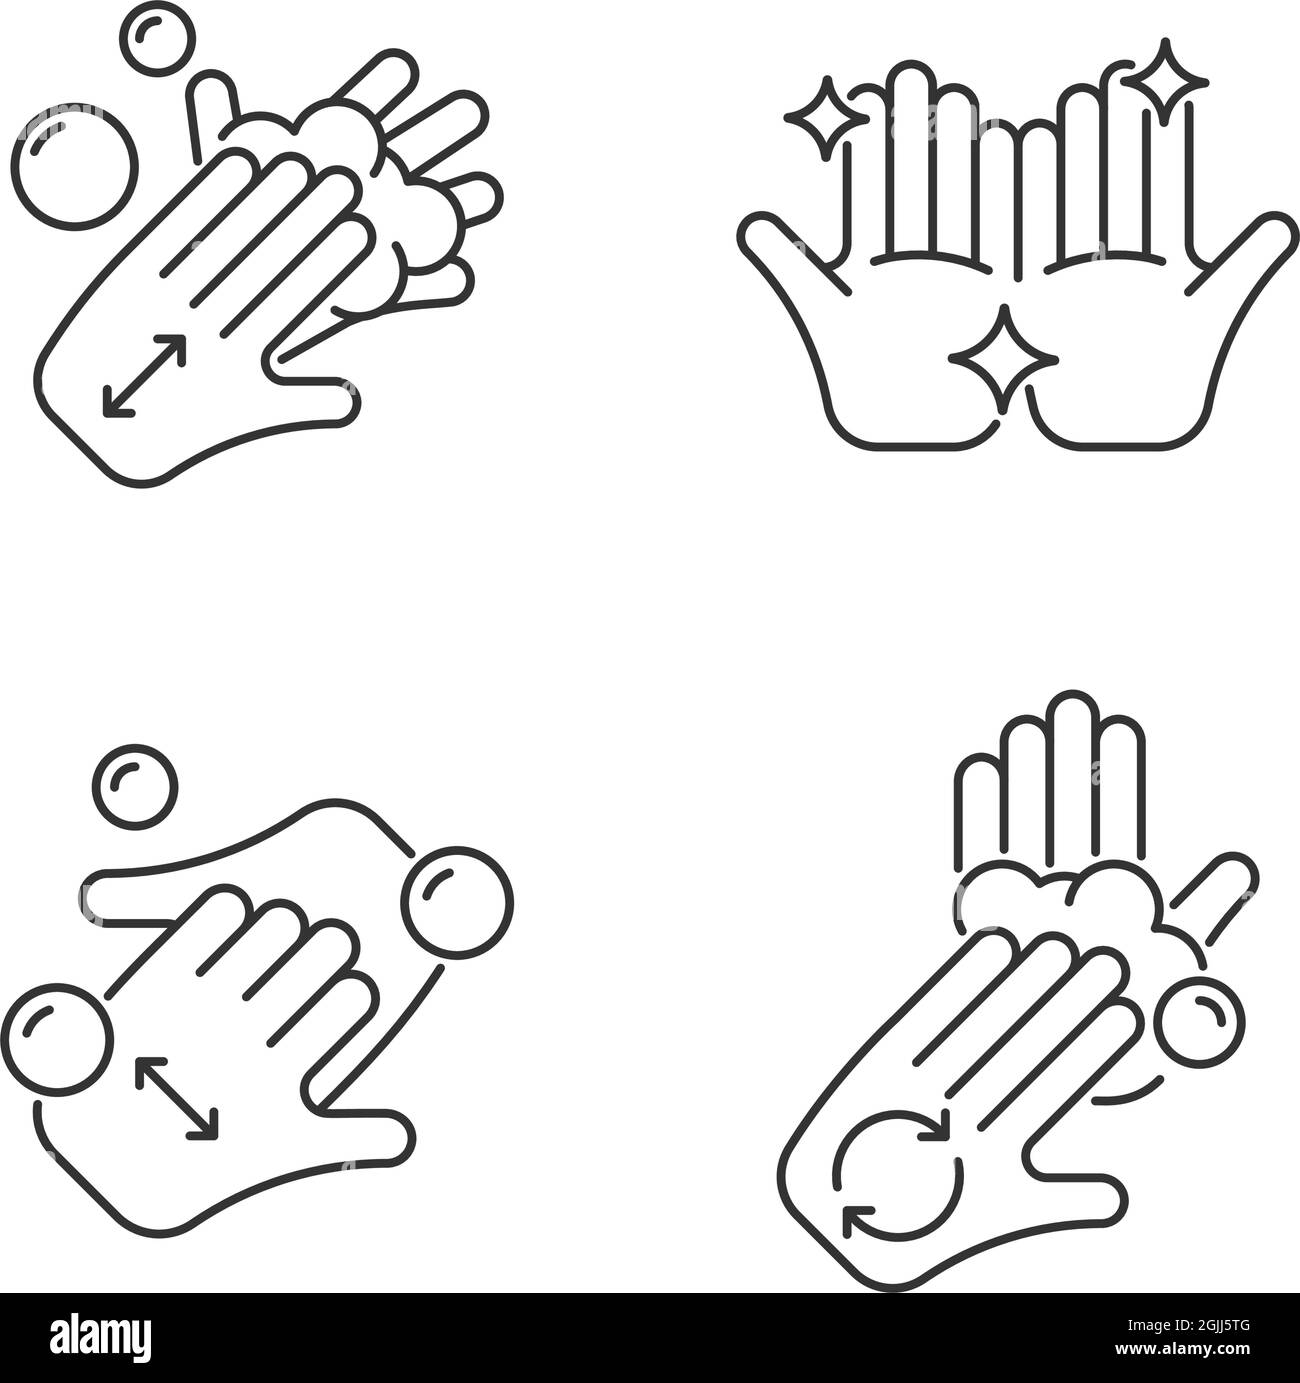 Washing hands instruction linear icons set Stock Vector